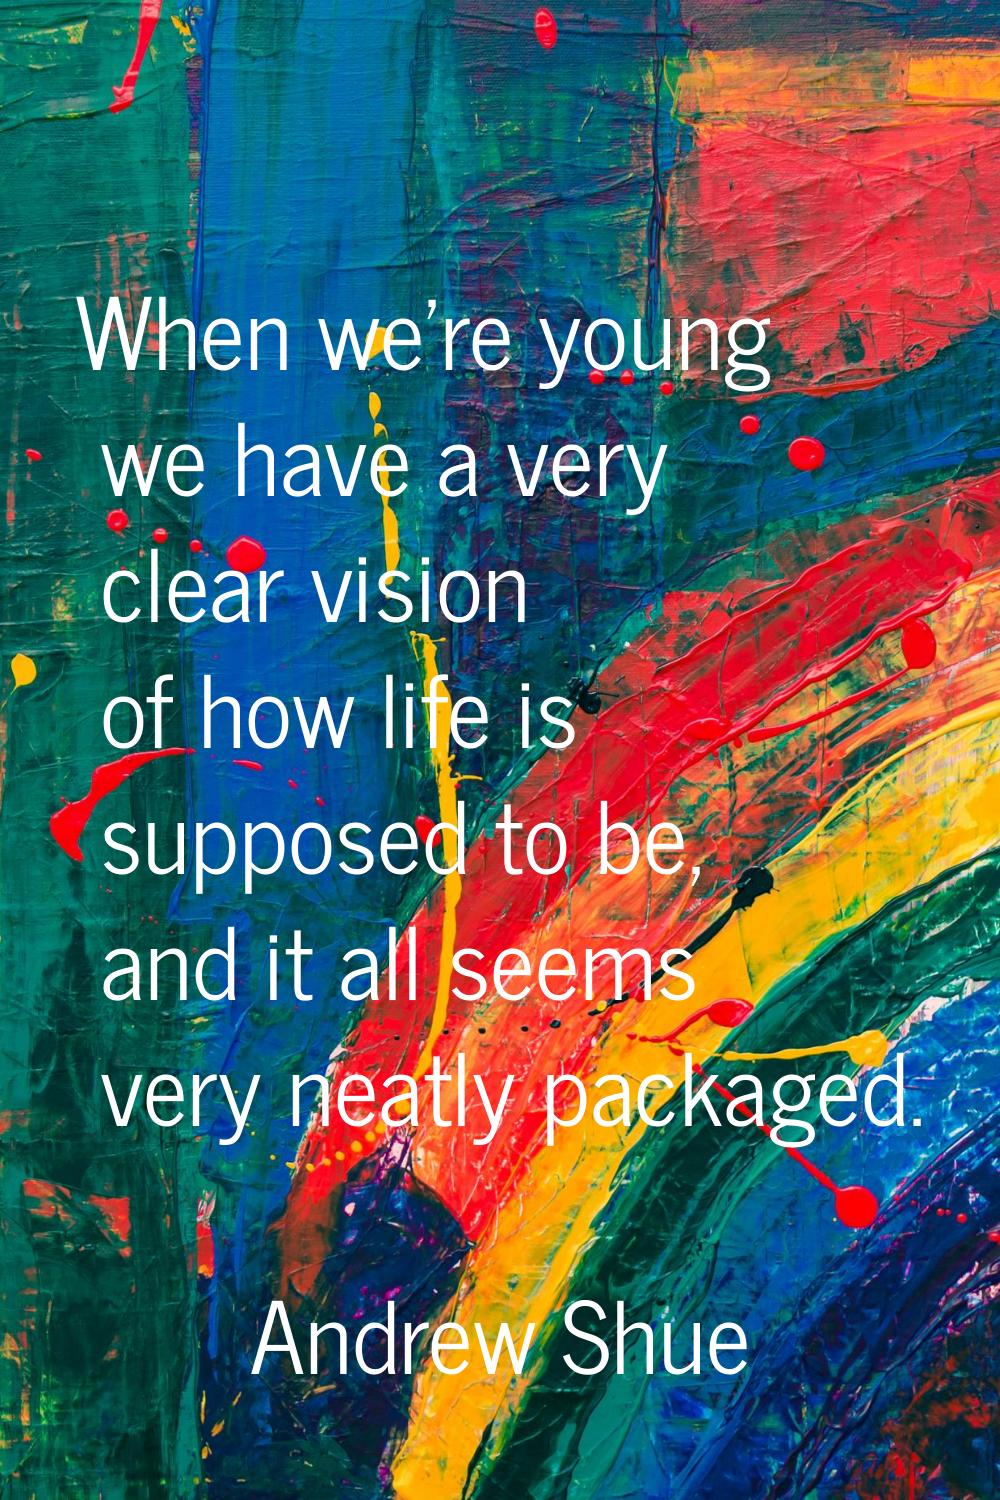 When we're young we have a very clear vision of how life is supposed to be, and it all seems very n